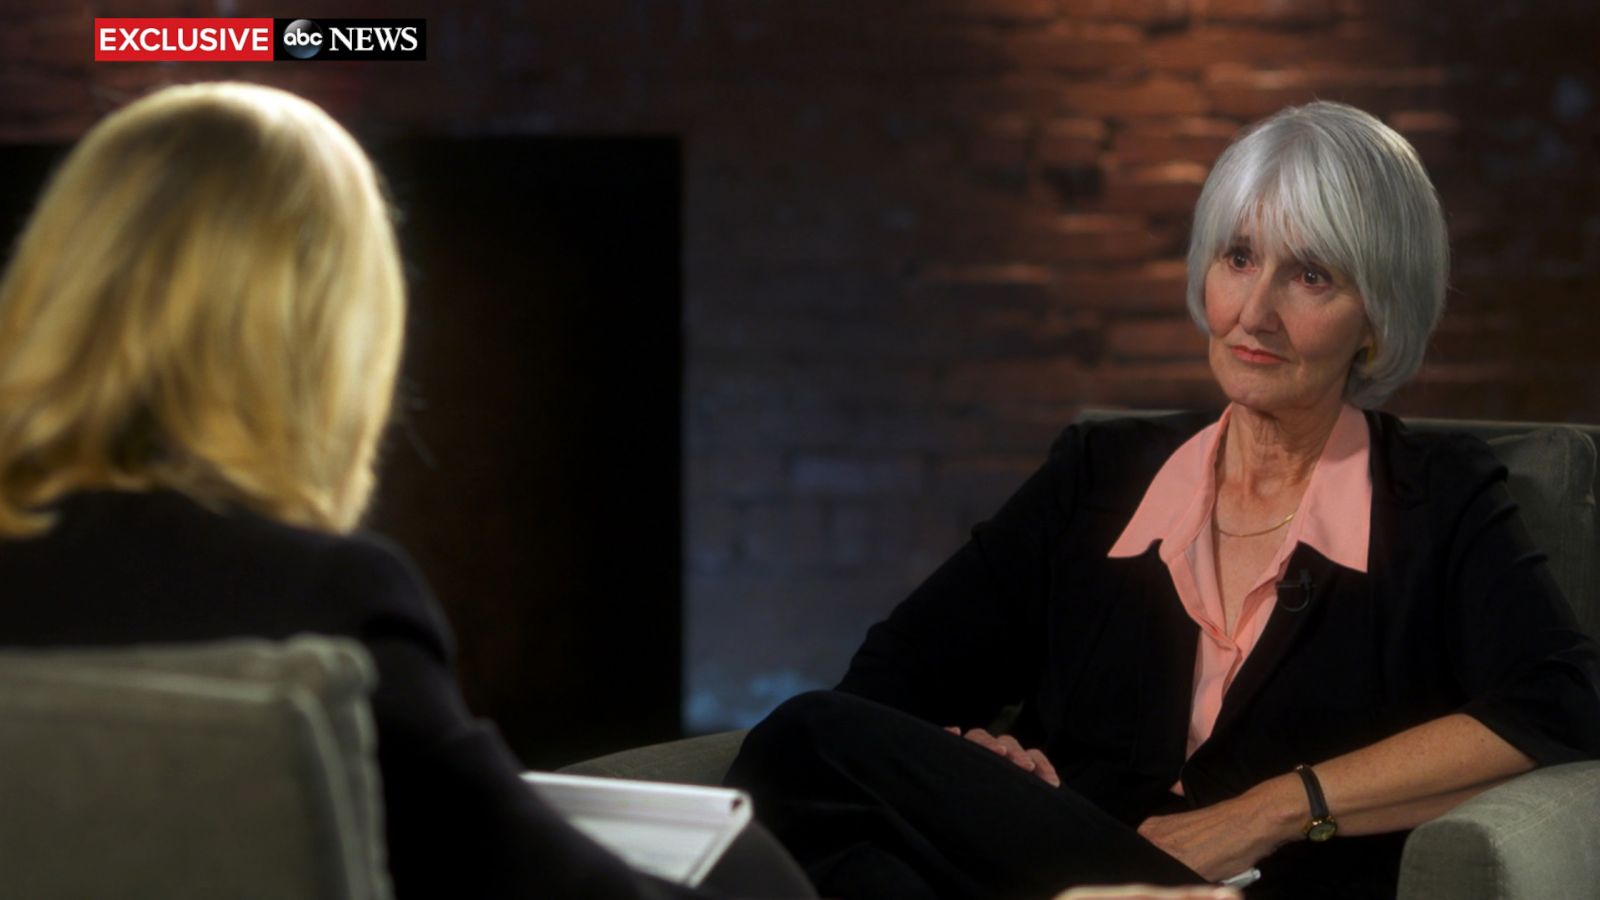 Columbine Killer's Mother Reflects on the Tragedy, Her Son, What She Missed